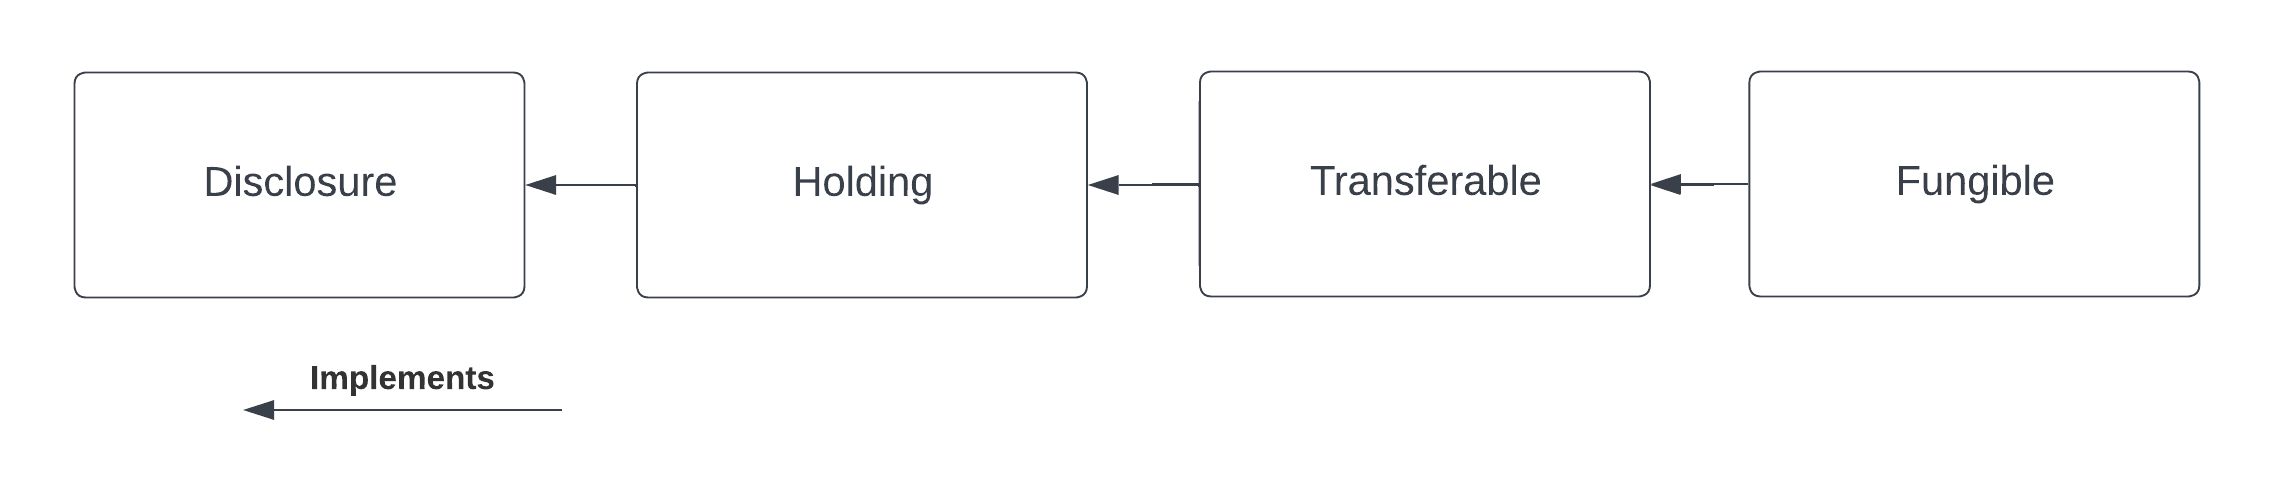 A diagram of t he interface hierarchy. From left to right, Disclosure, Holding, Transferable, and Fungible are each linked by arrows pointing left. Below is an arrow, also pointing left, labelled Implements.